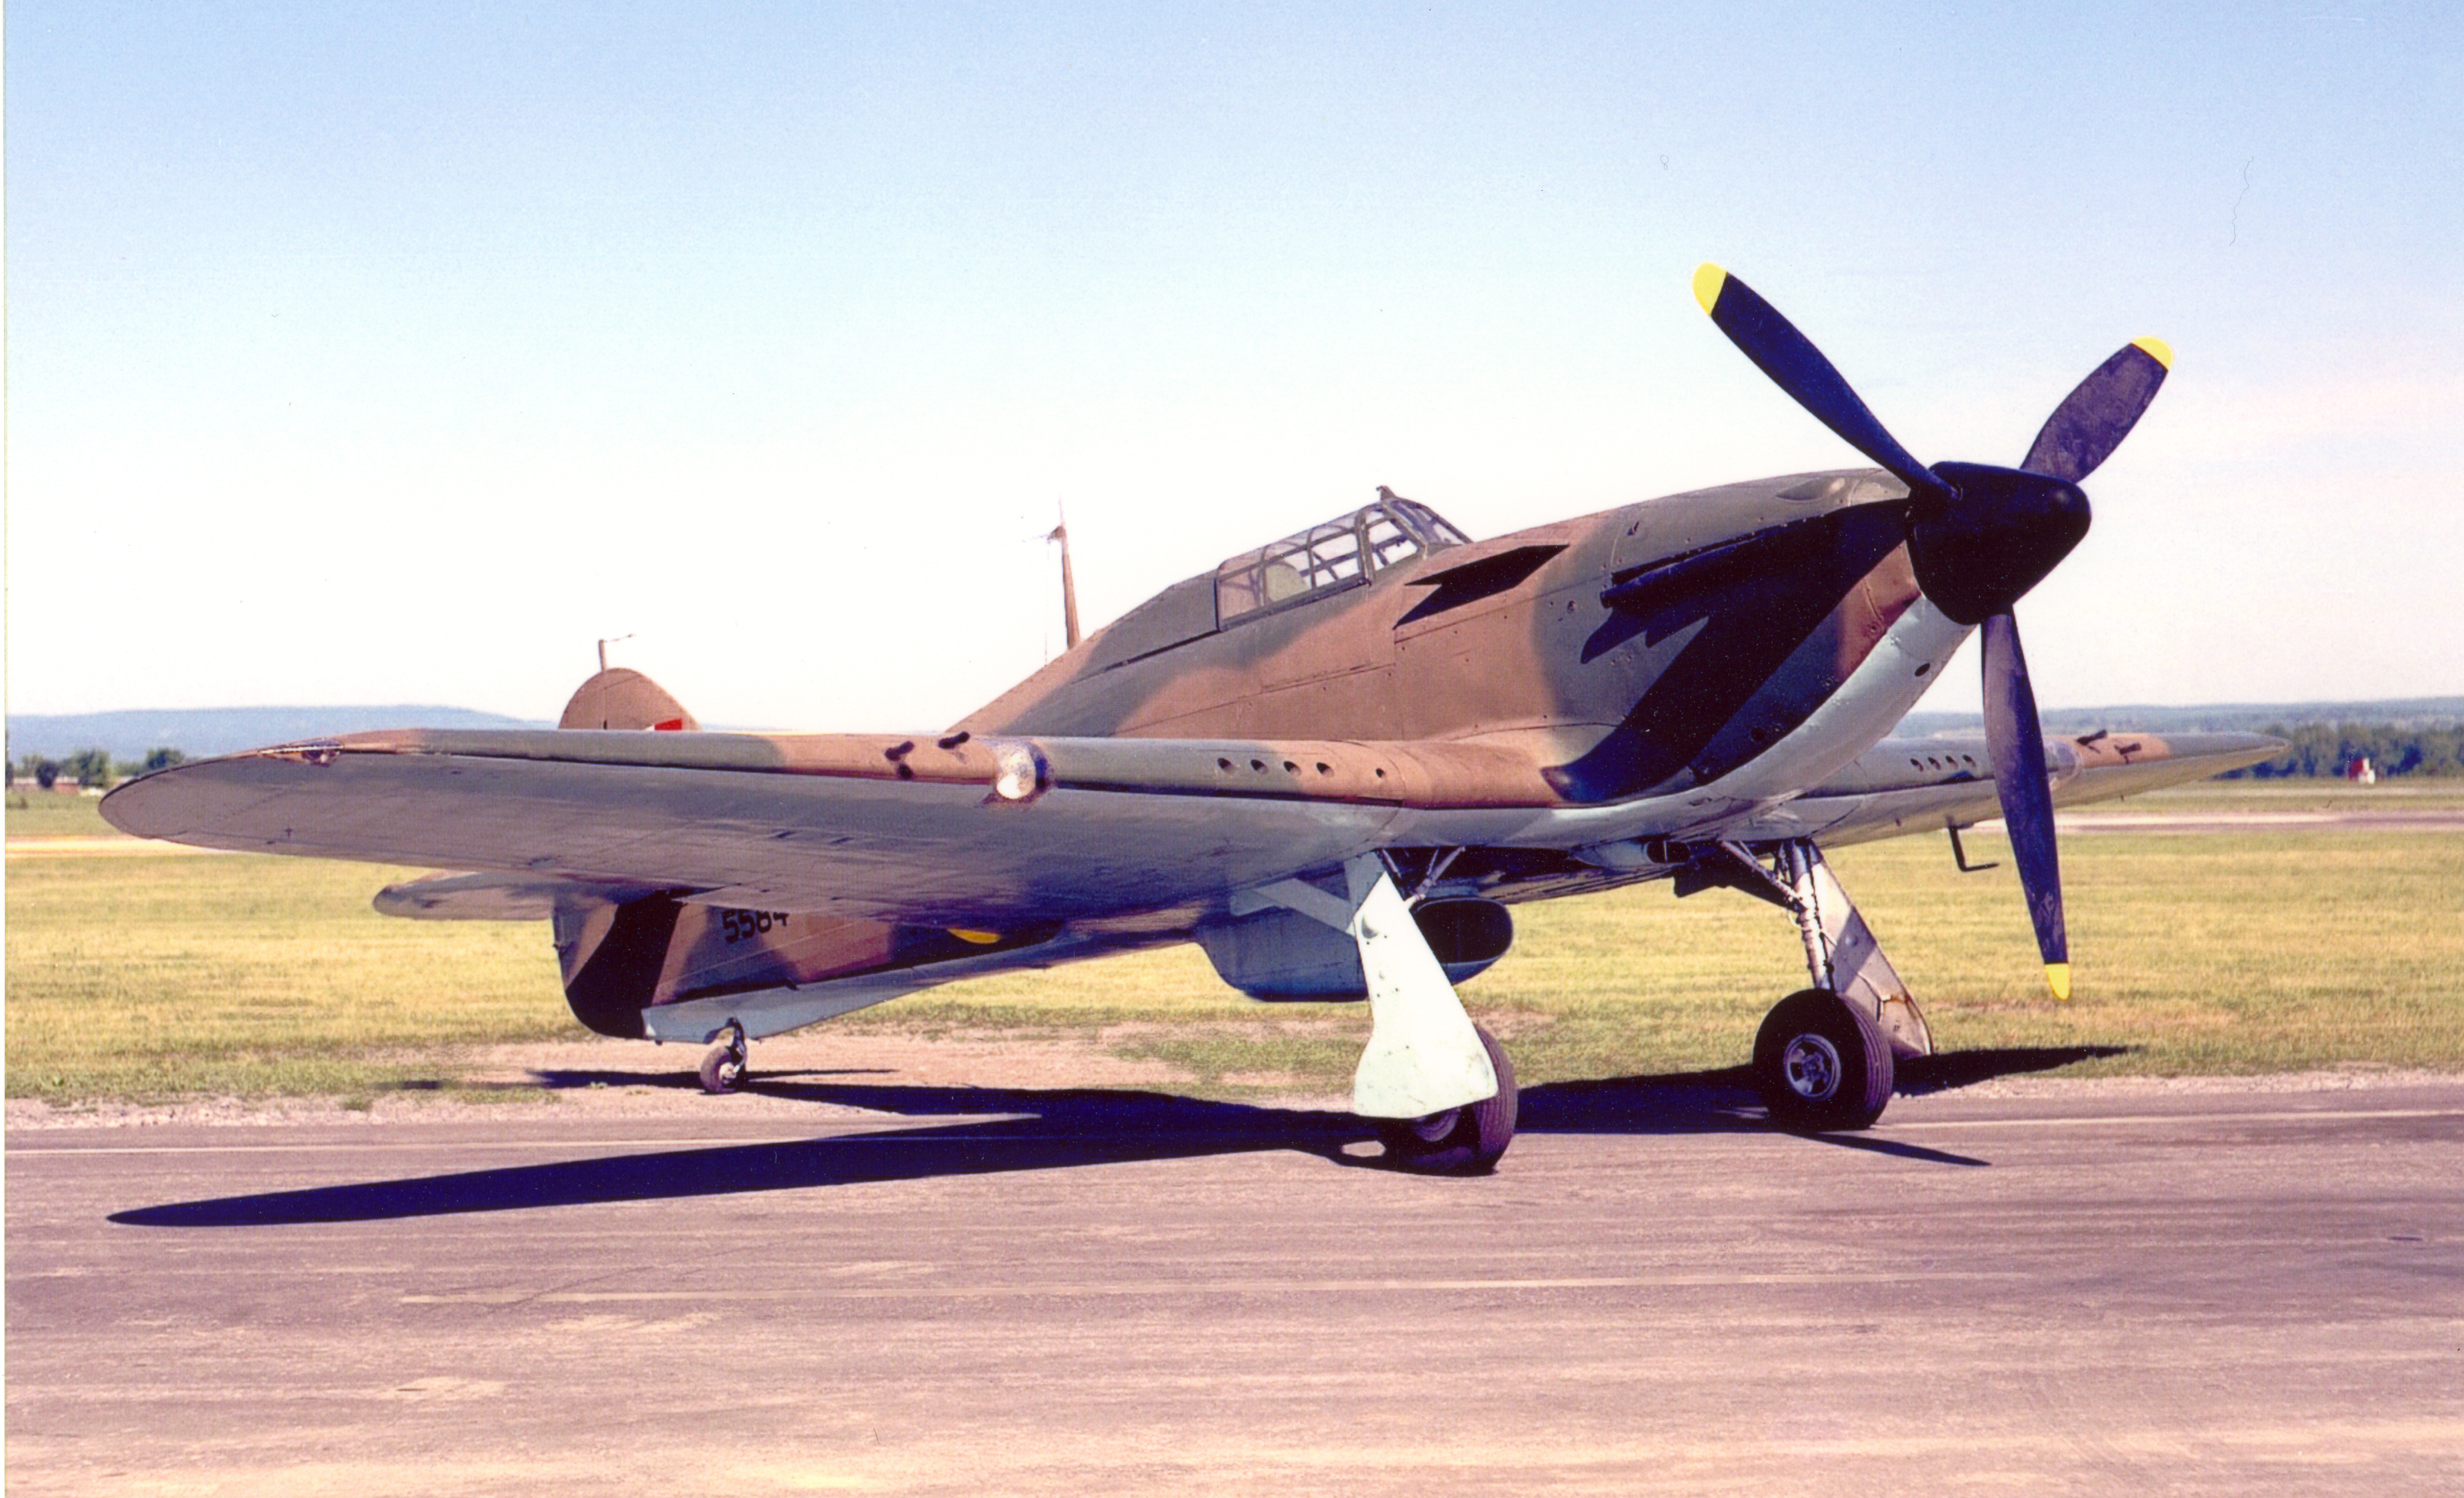 The Hawker Hurricane was the Royal Air Force’s premiere fighter at the beginning of the Second World War. At the outbreak of hostilities, it was also the RCAF’s only modern fighter. This RCAF Hurricane has been preserved by the Canada Aviation and Space Museum. 